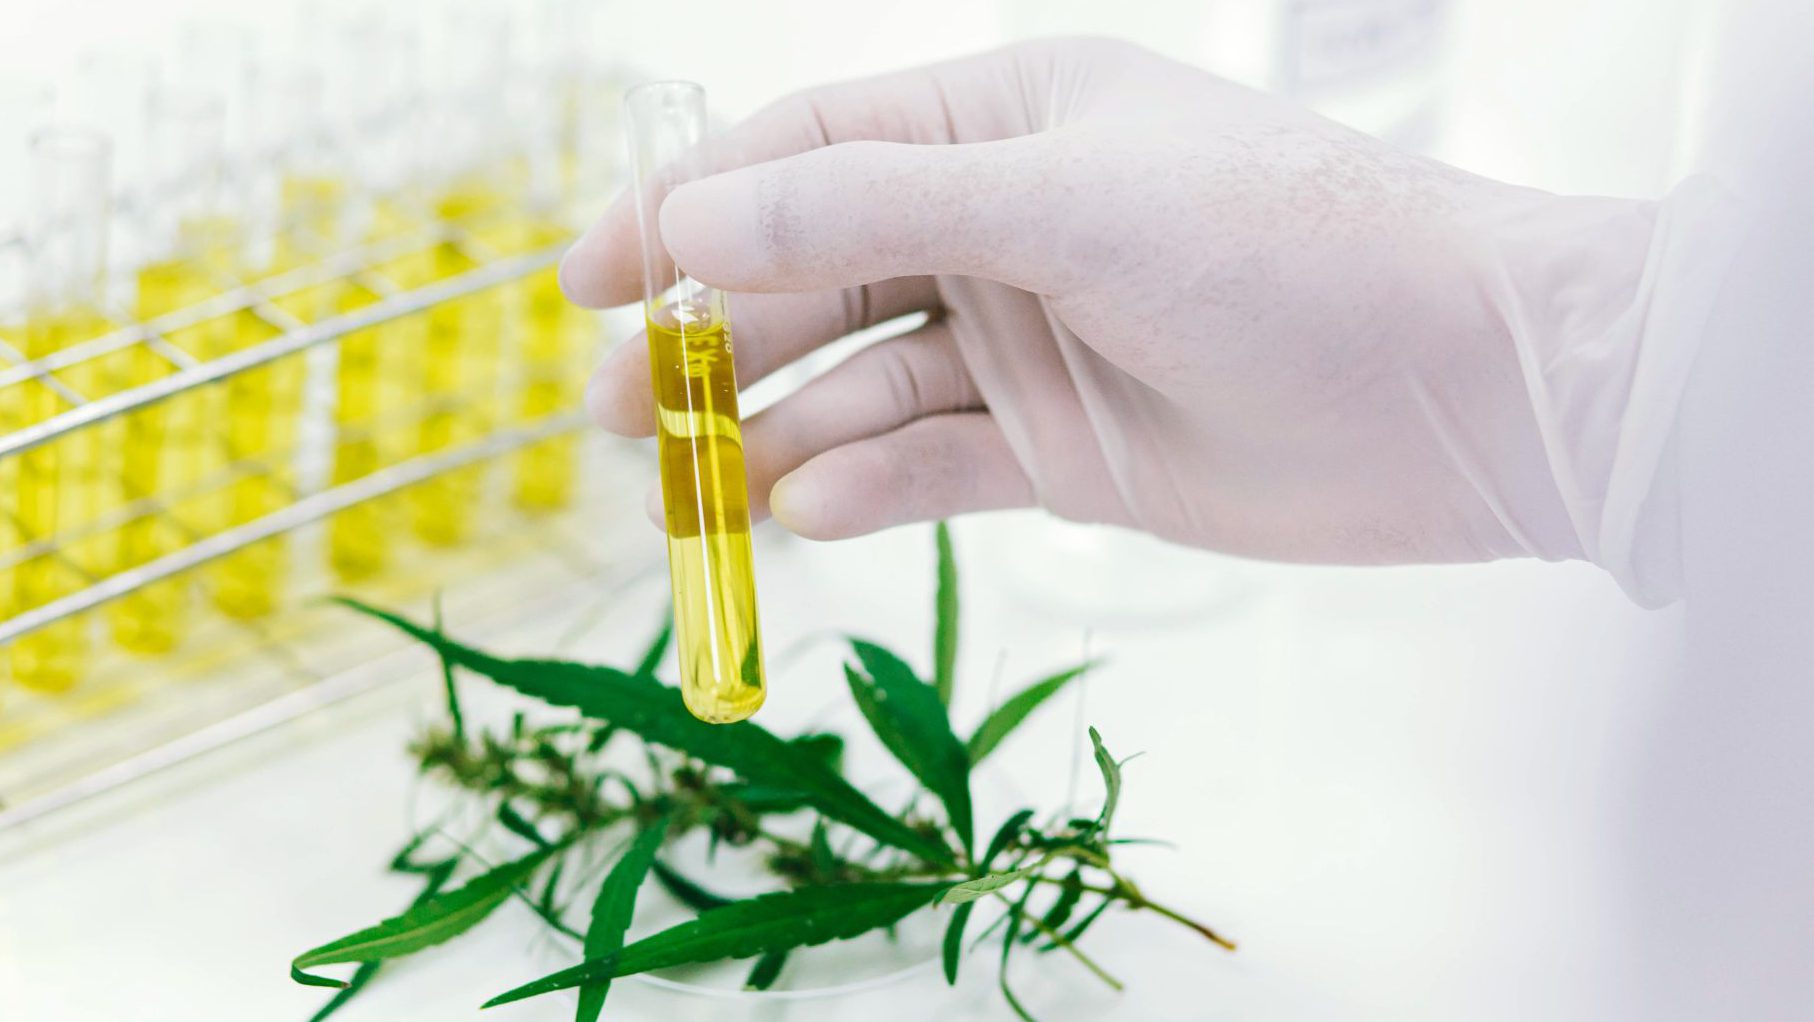 Global Cannabis Testing Market Overview And Prospects – Includes Cannabis Testing Market Share